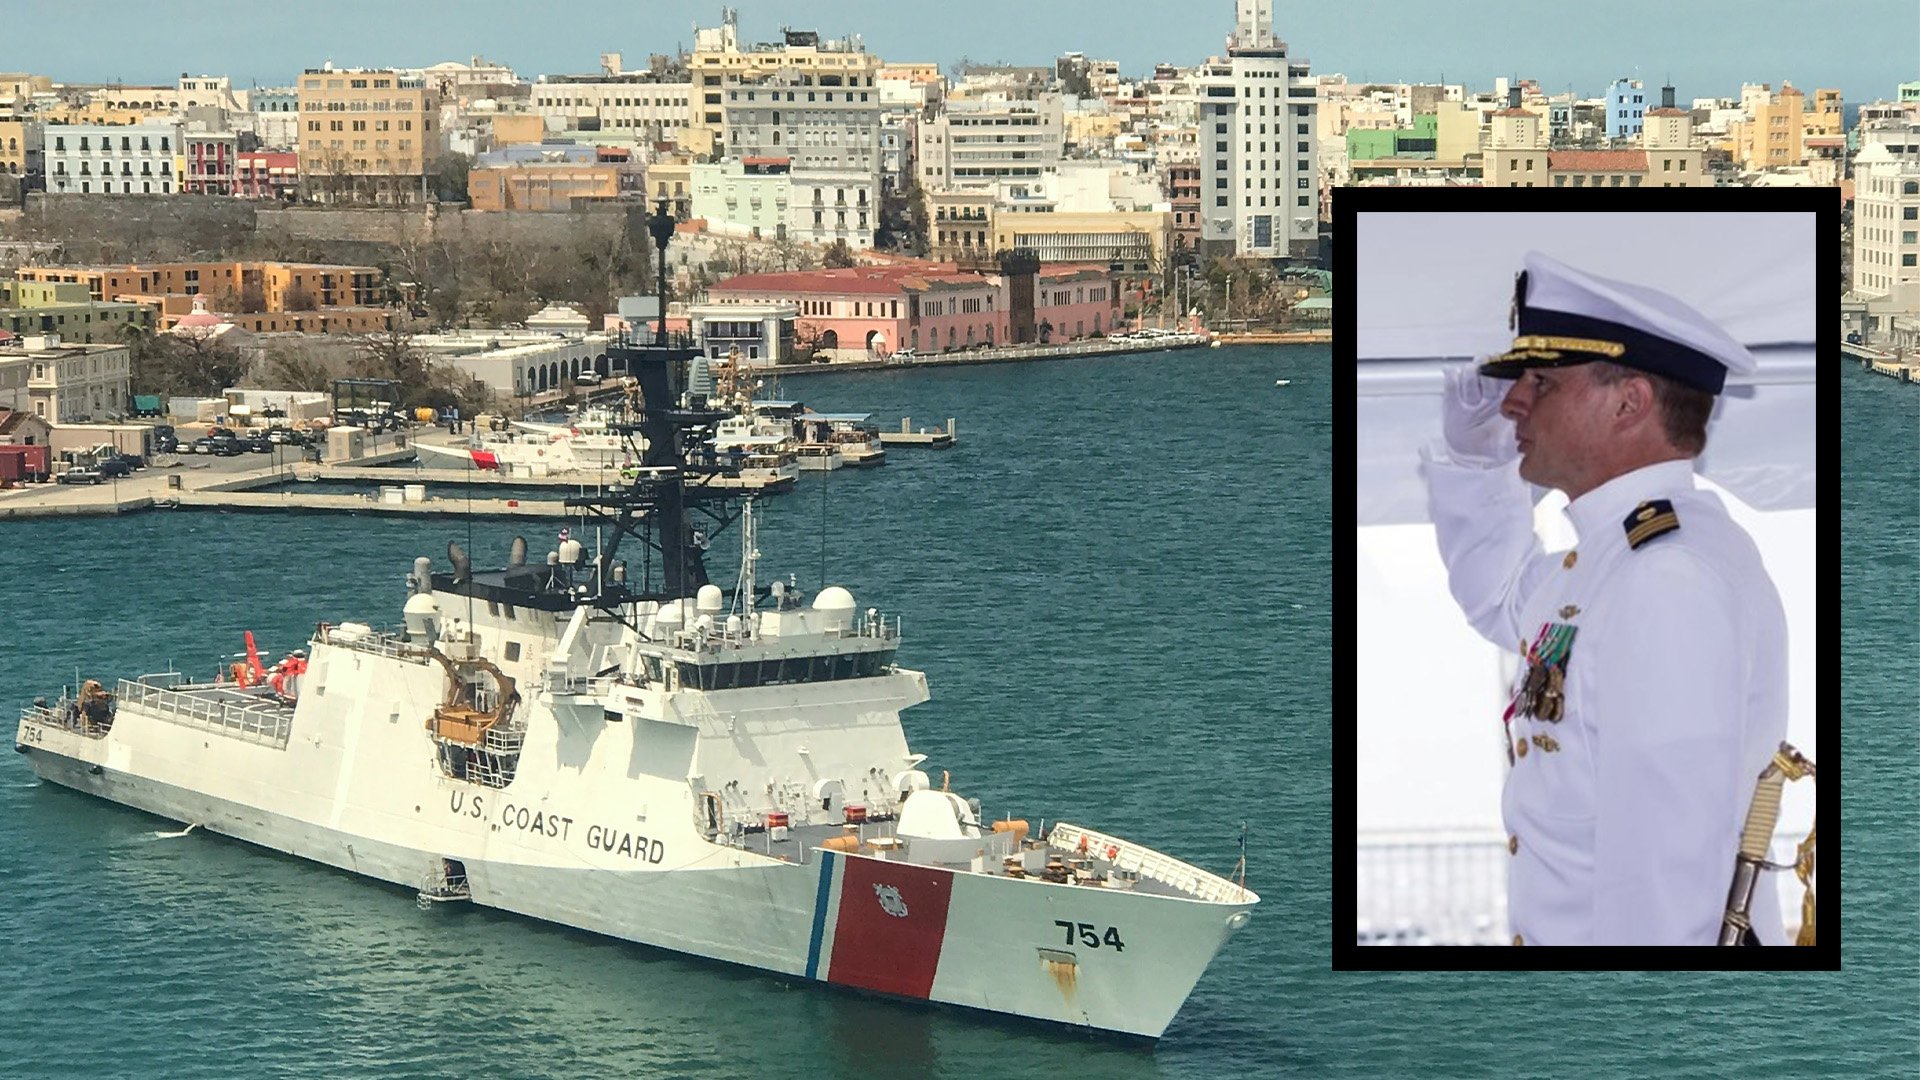 On Friday, Aug. 26, 2022, the commander of US Coast Guard Atlantic Area temporarily relieved Capt. Marc Brandt as the commanding officer of the cutter James, pending the outcome of an ongoing probe into a mishap on board the Legend-class vessel. Coffee or Die Magazine composite.